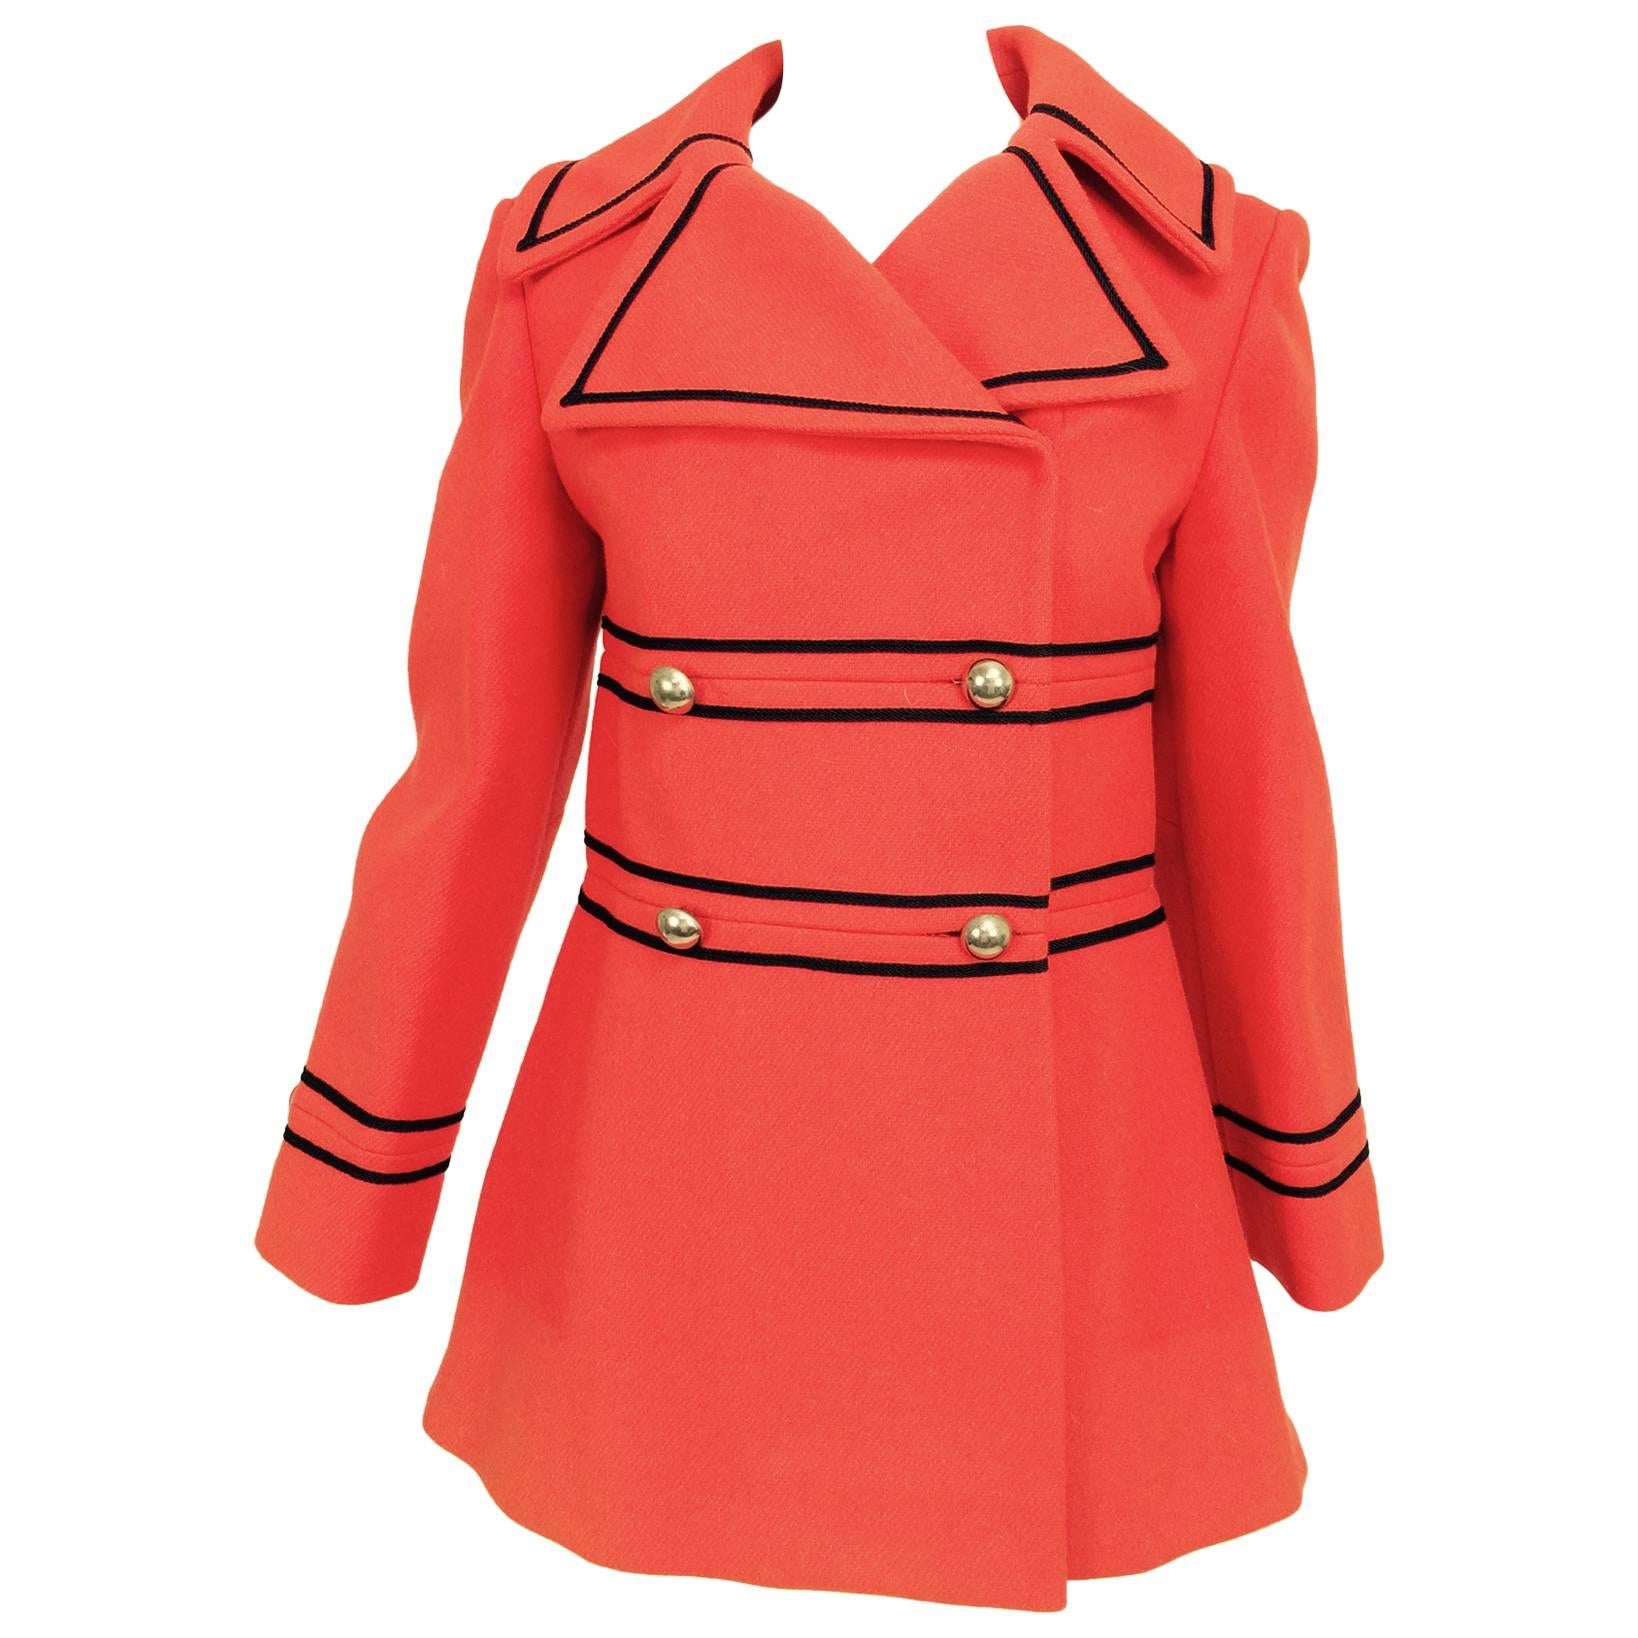 Tomato red wool military style pea coat Junior Gallery 1960s